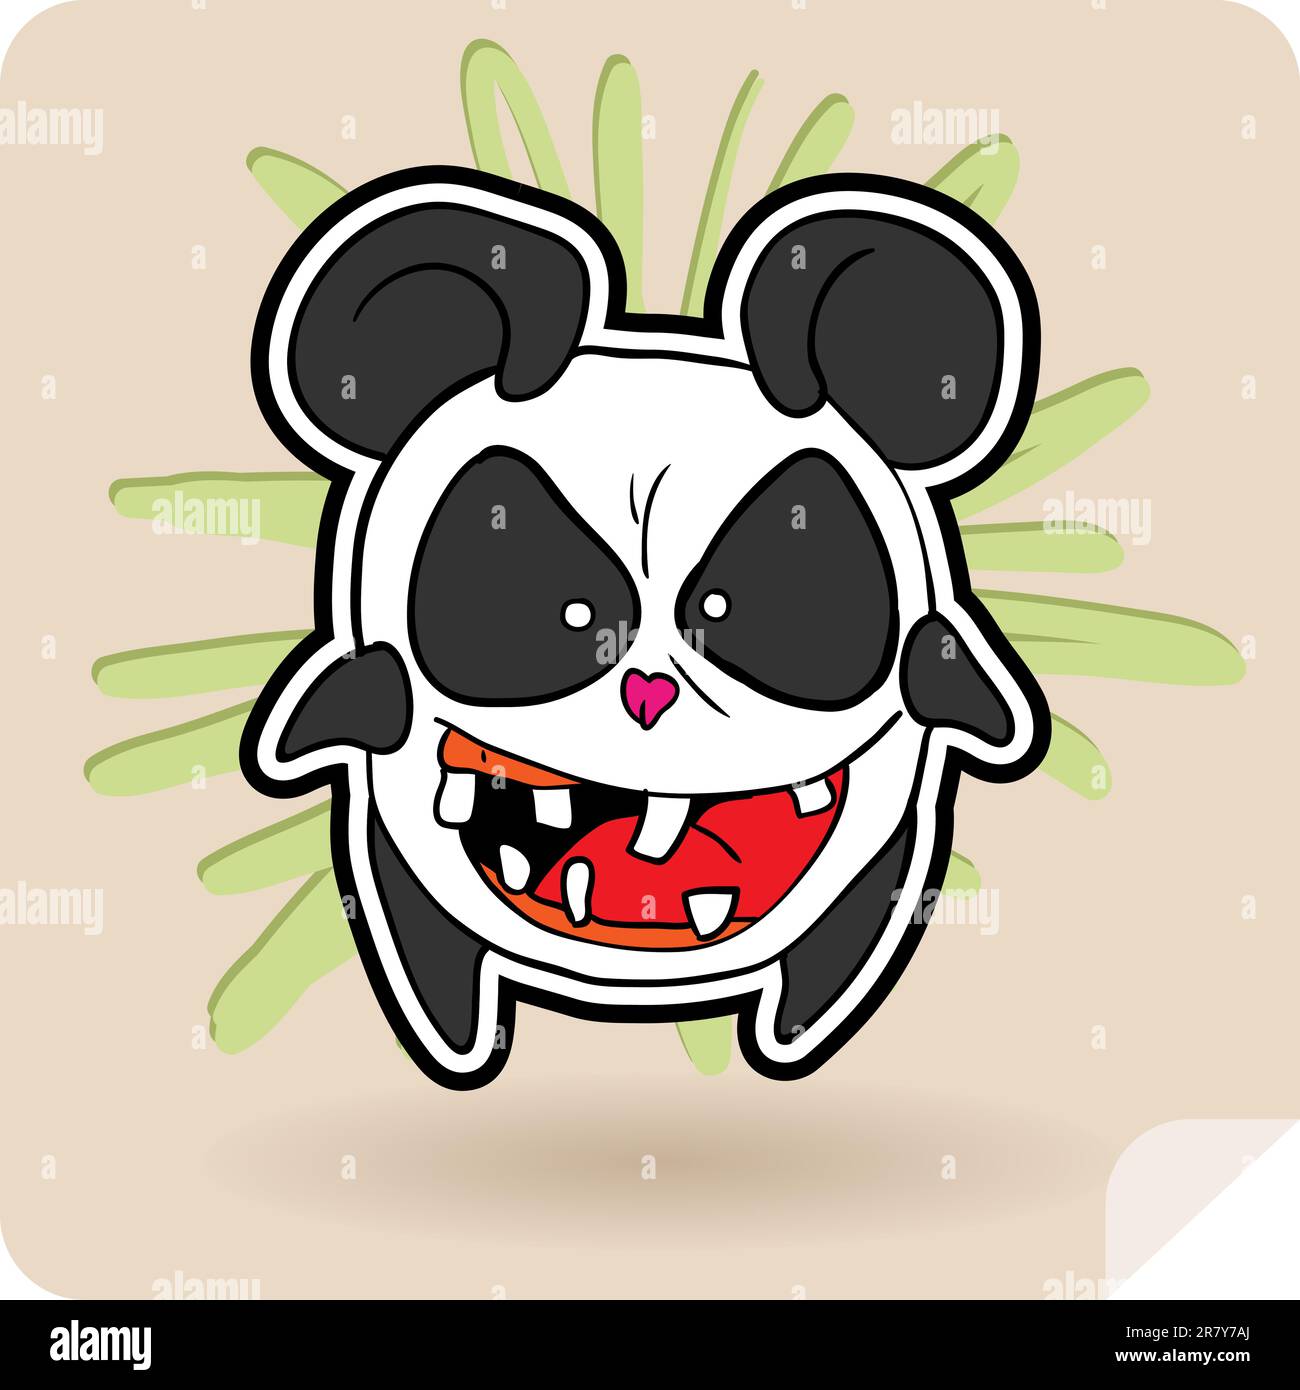 Angry, colorful, funny panda anime. Vector illustration. Stock Vector